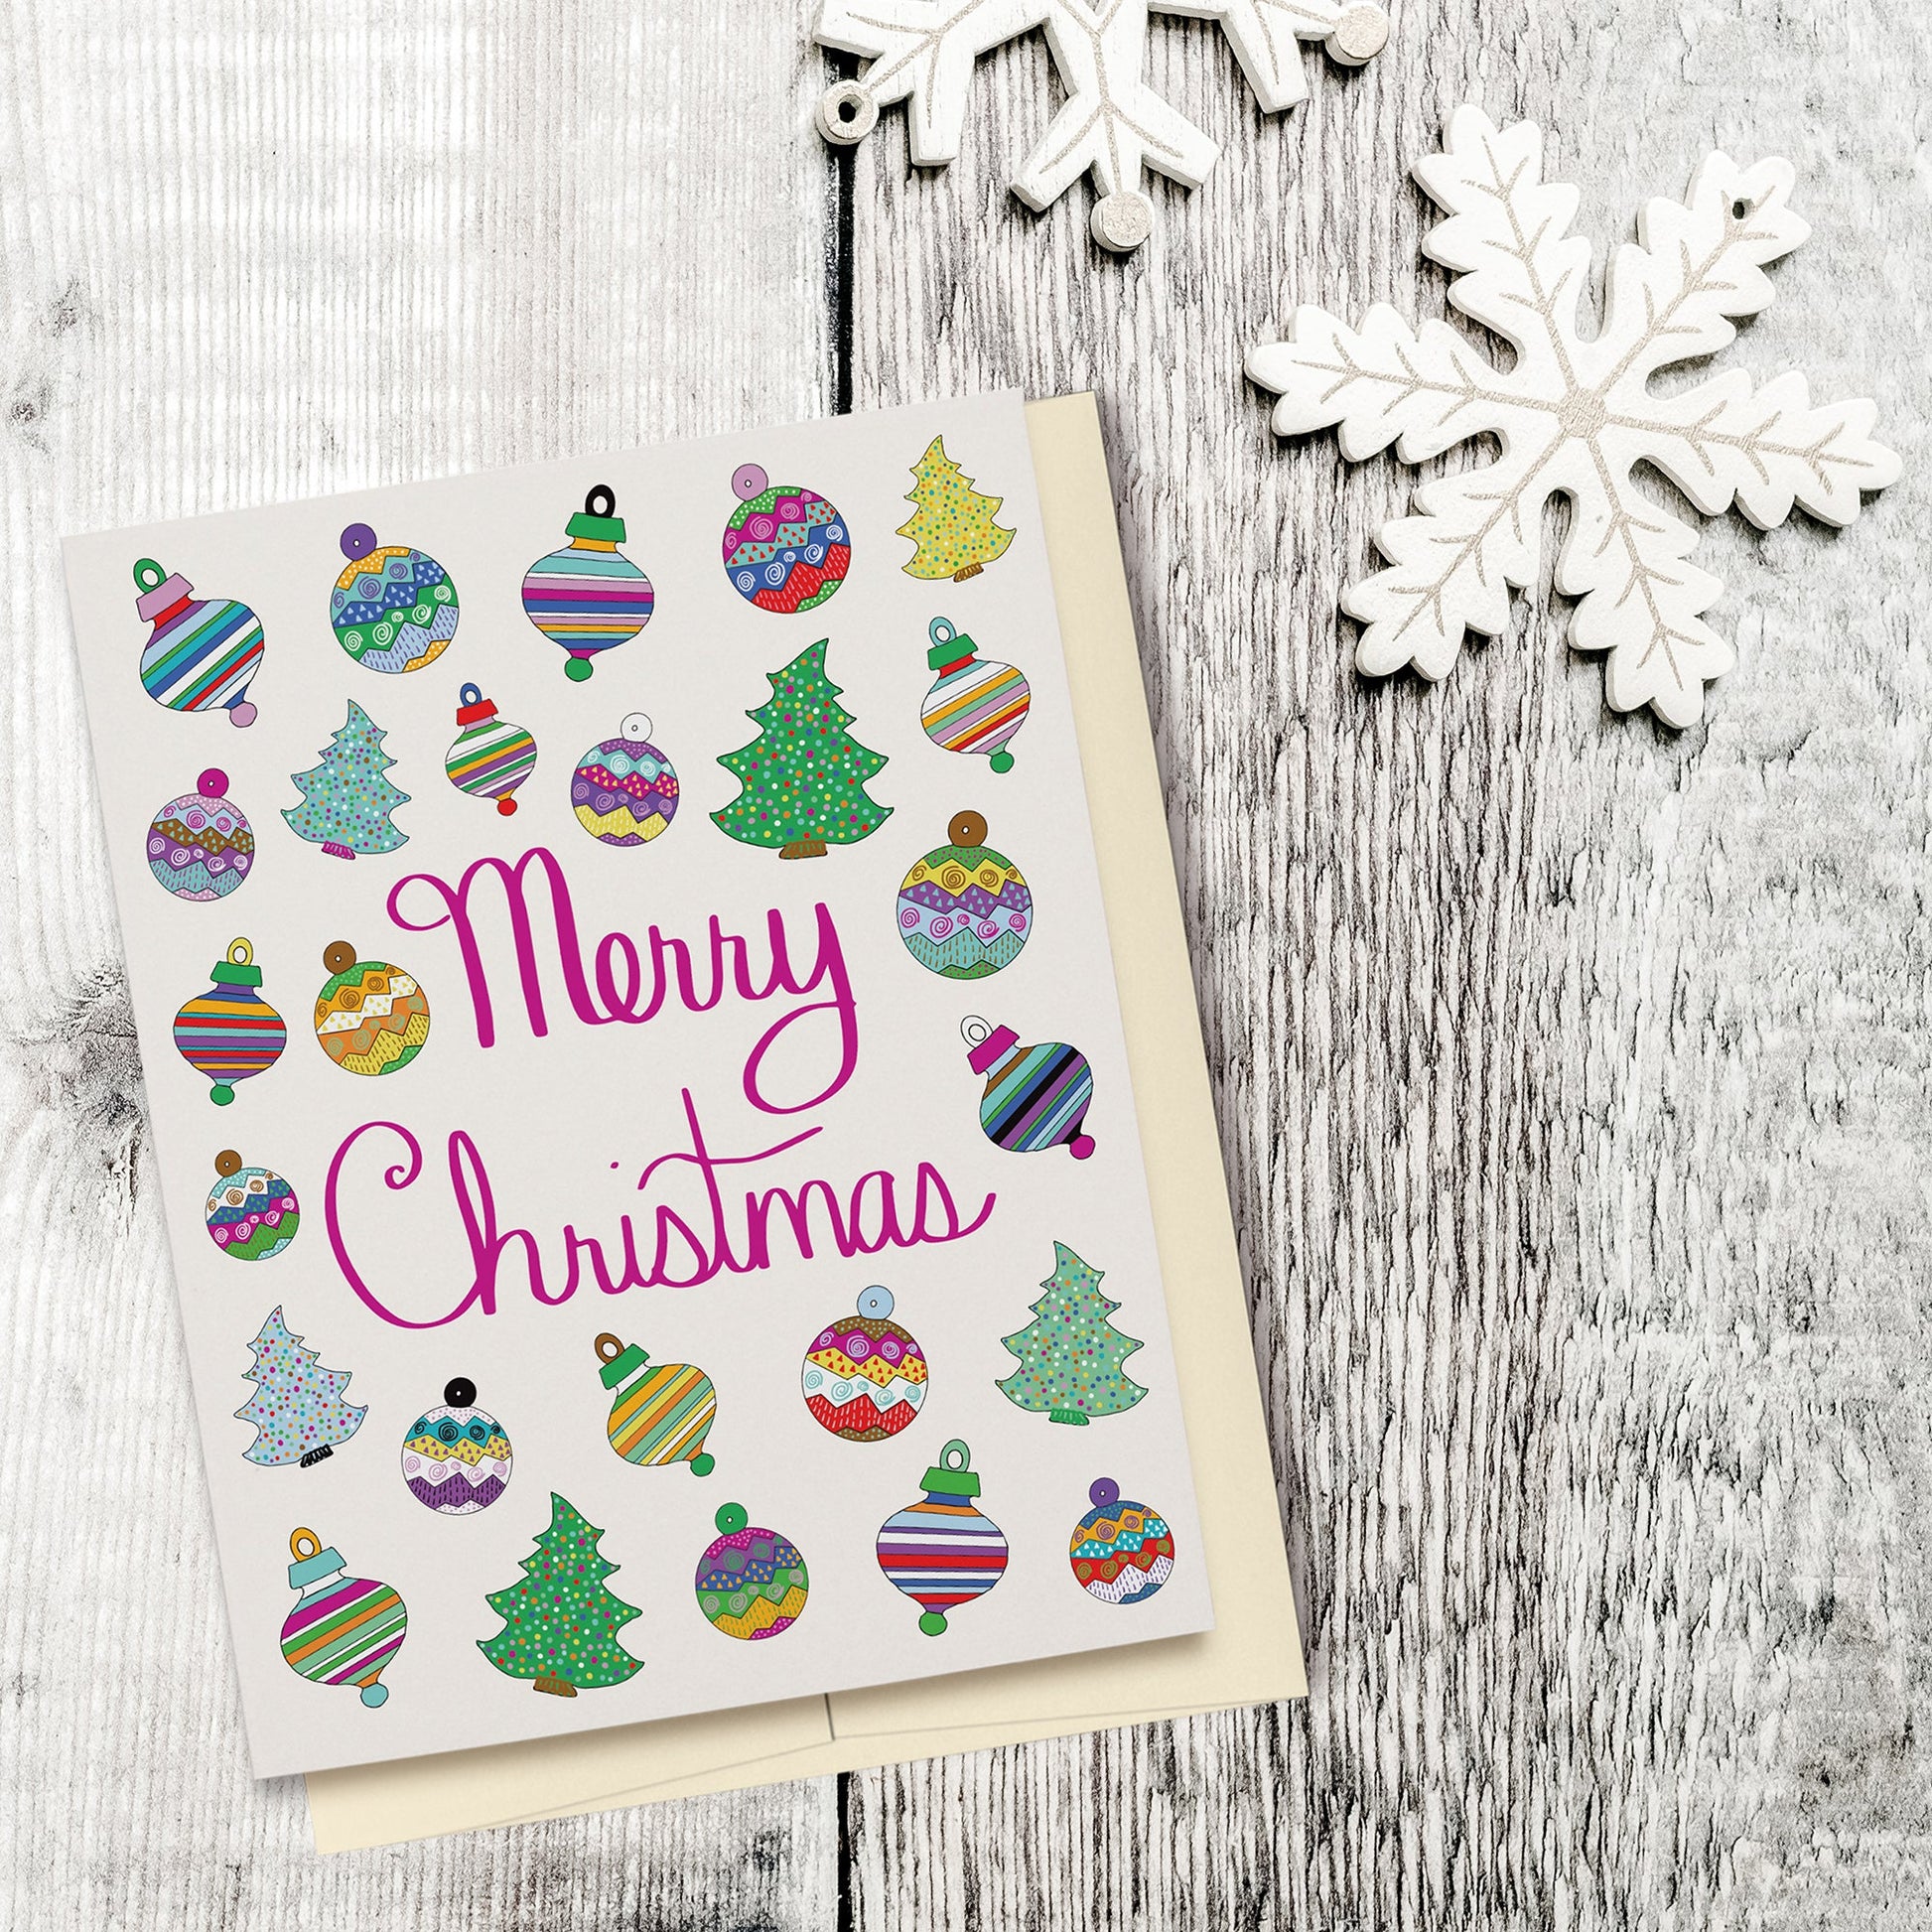 Fun & Festive Merry Christmas Card featuring hand drawn colorful ornaments & Christmas trees with fuchsia-colored hand lettered "Merry Christmas" script. Displayed on a wood background with wooden snowflake ornaments.